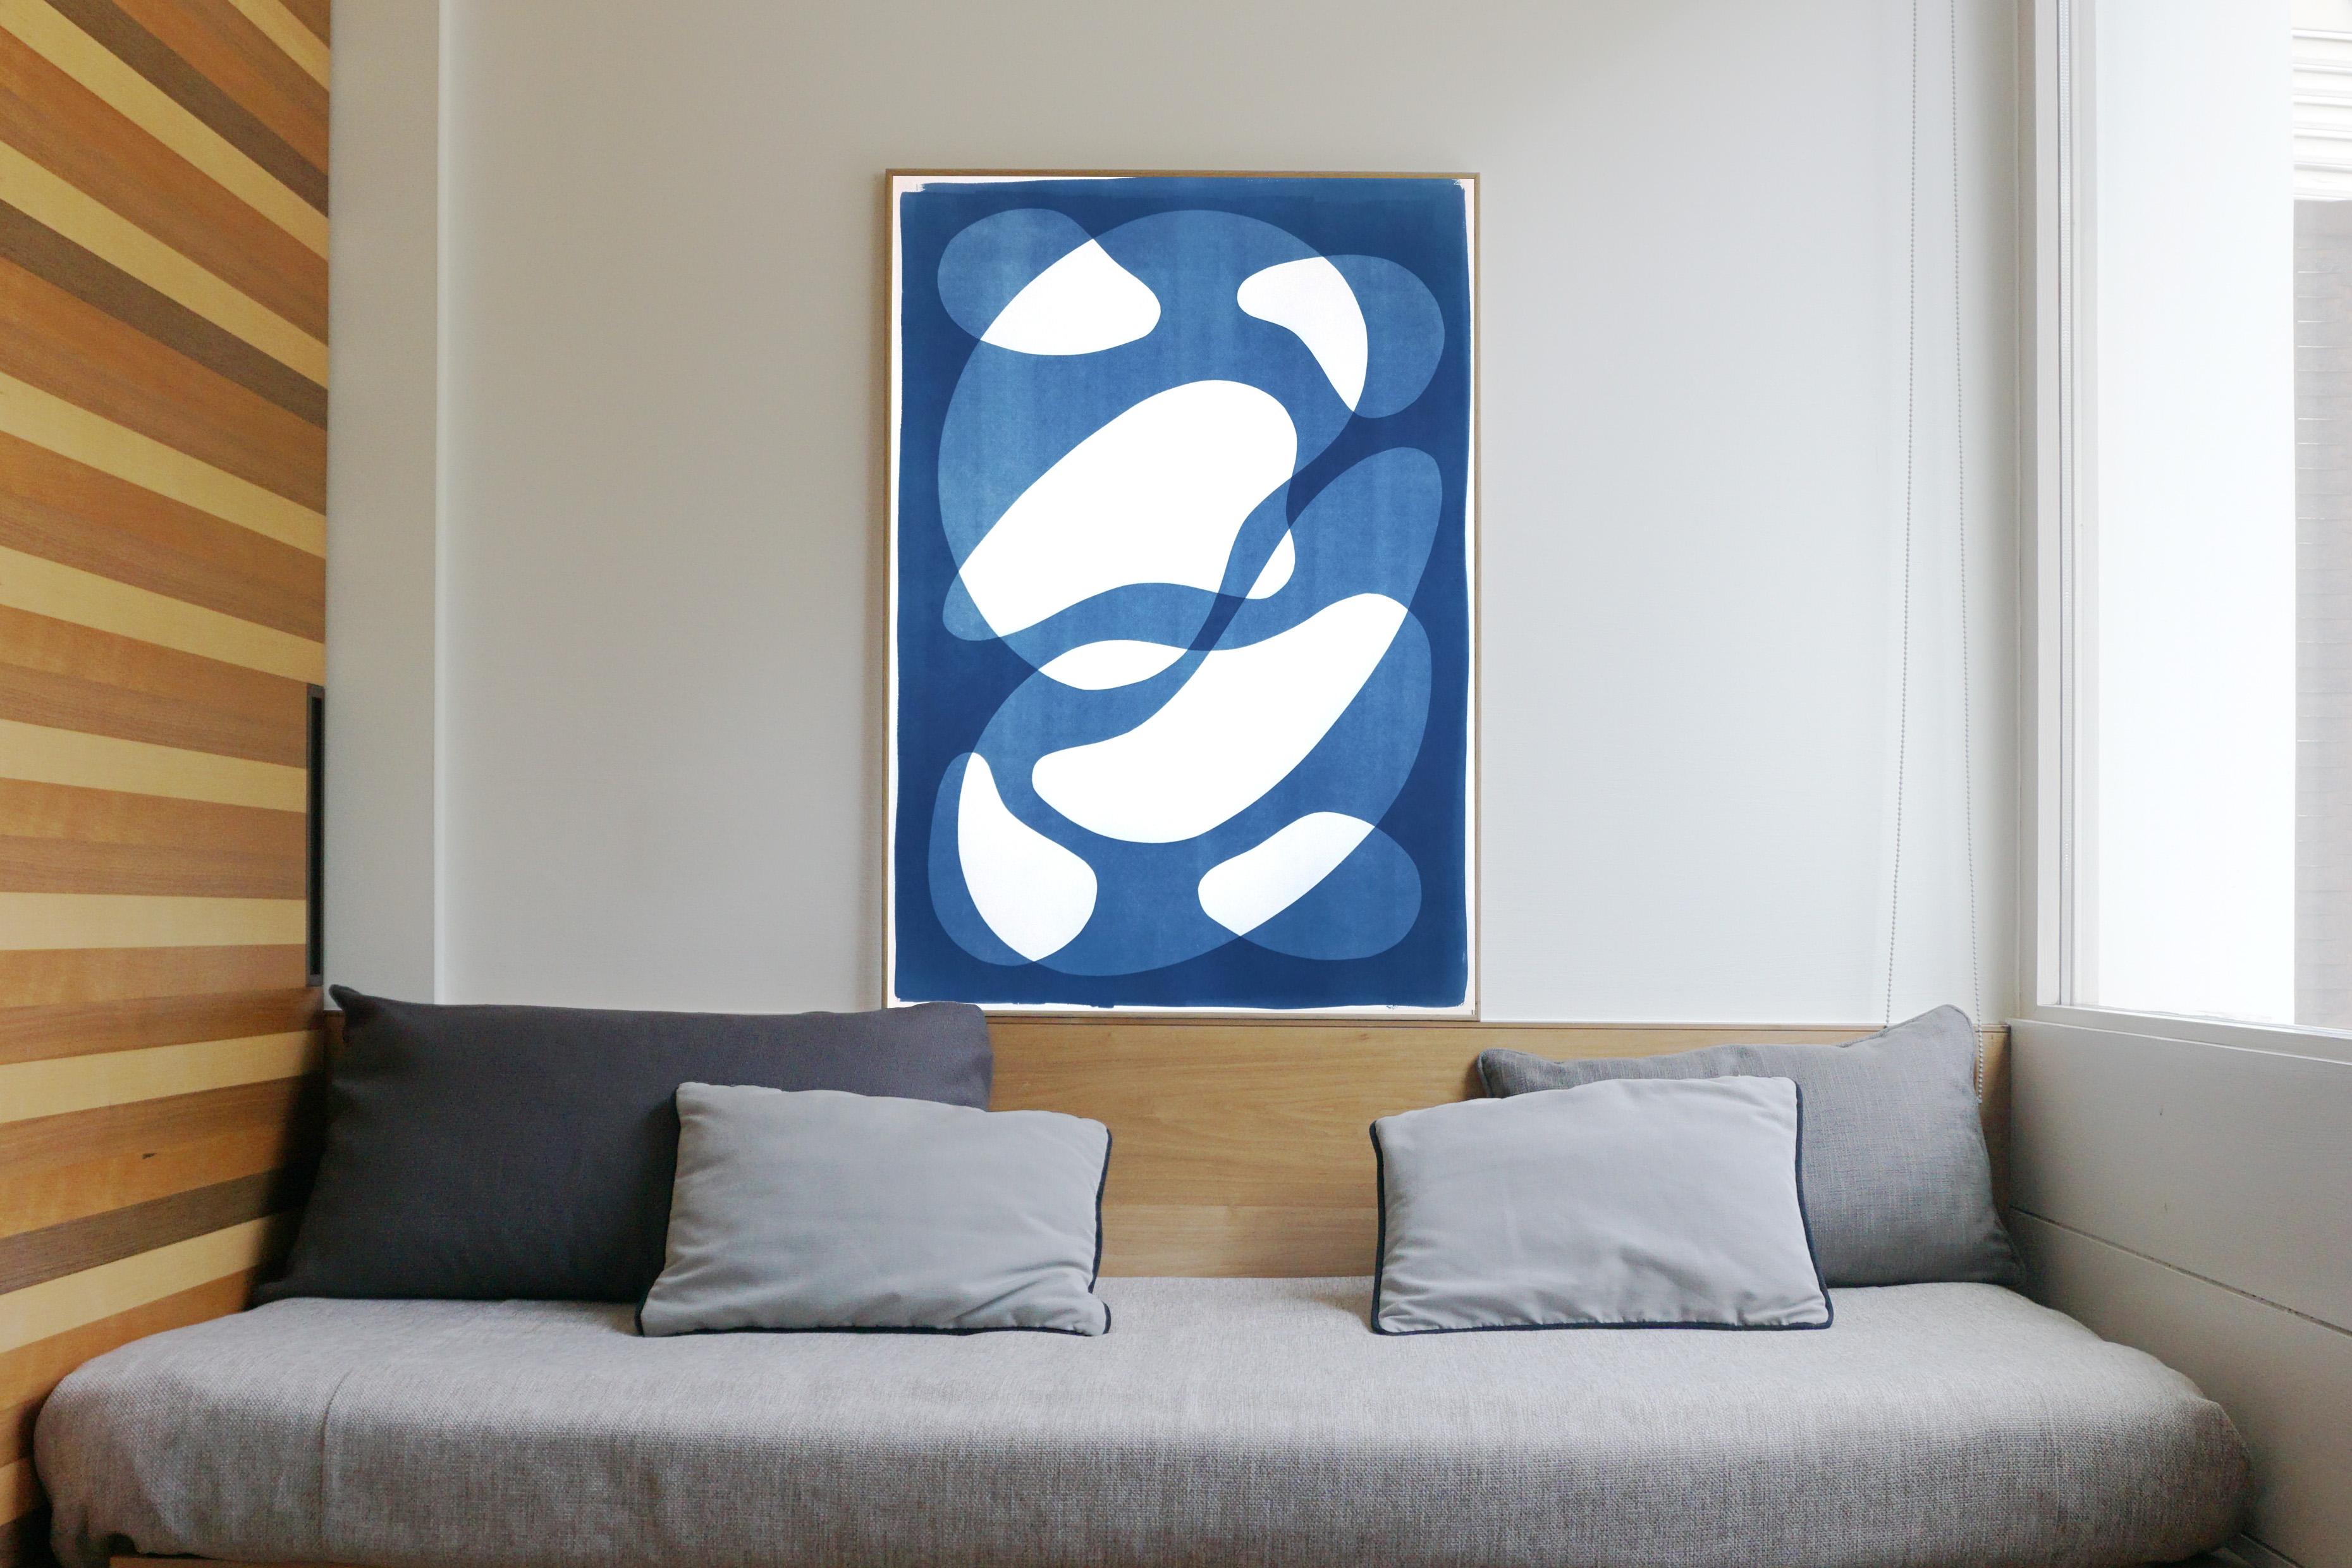 Abstracted Blue Face II, Mid-Century Shapes Figures on Paper, Handmade Monotype - Minimalist Photograph by Kind of Cyan